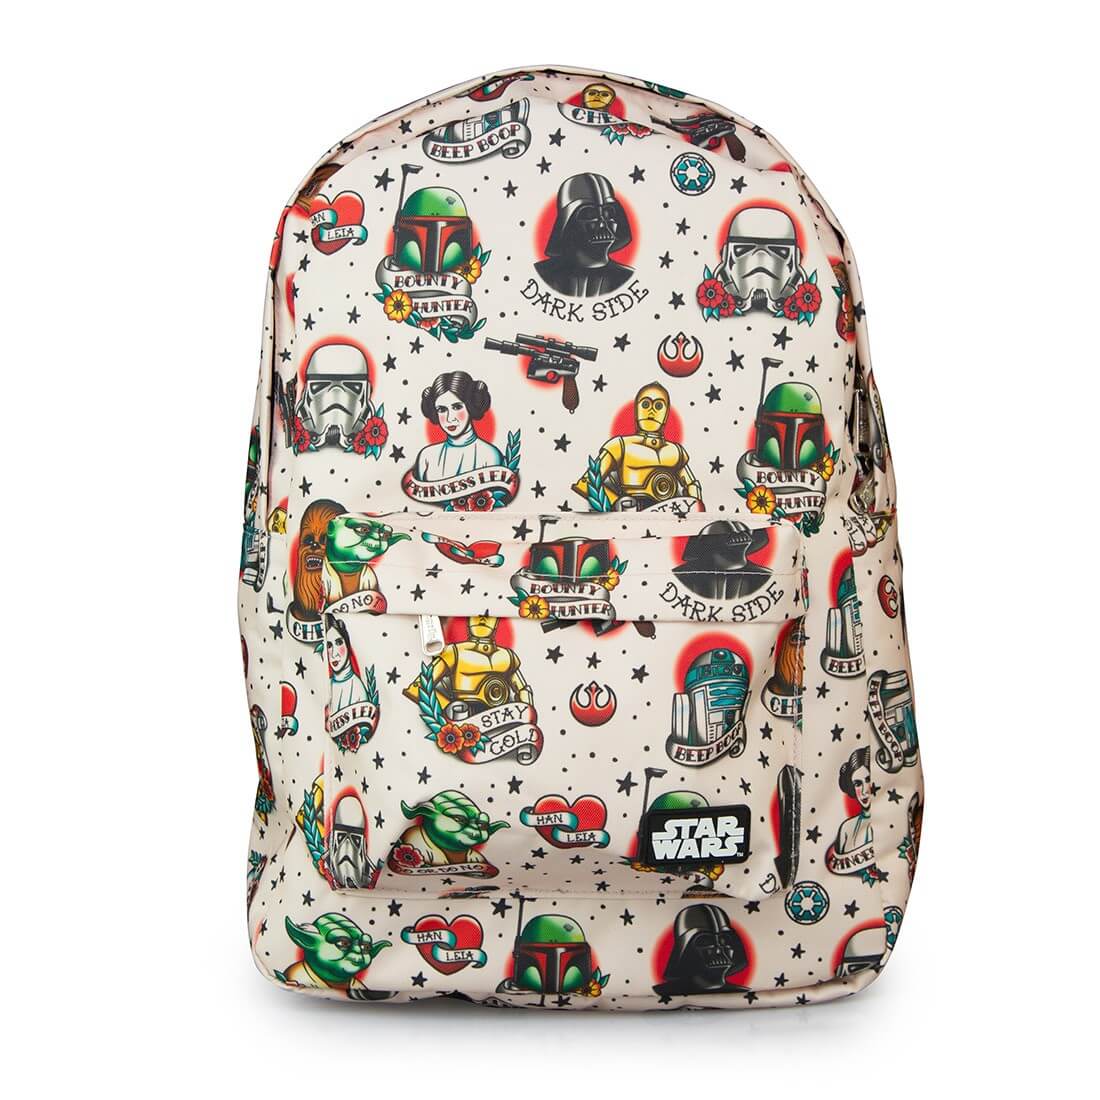 Star Wars cool backpacks for back-to-school